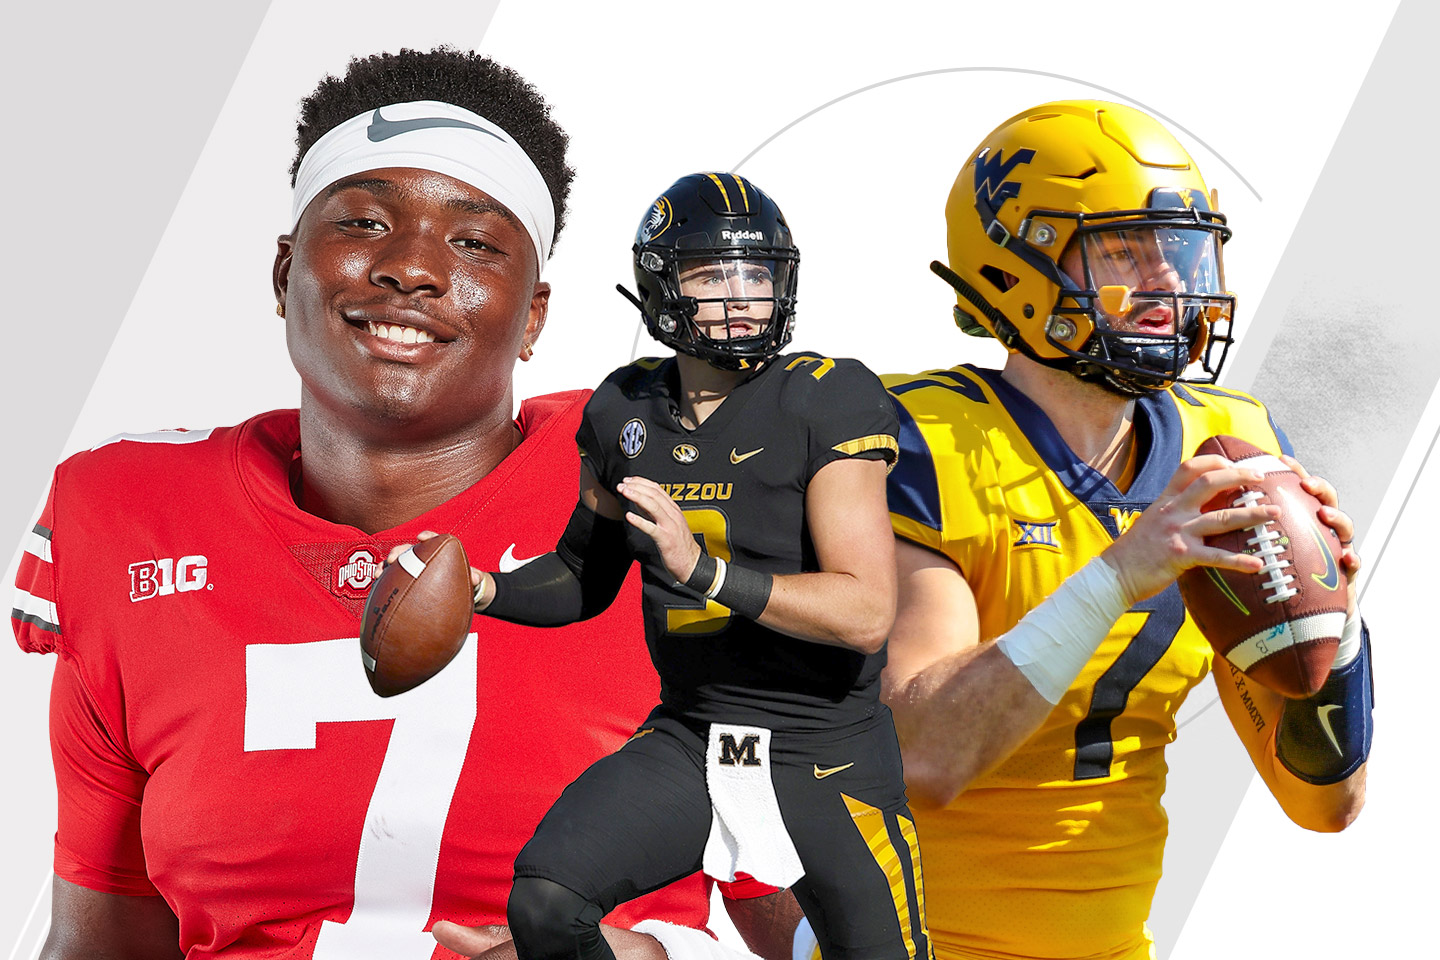 Meet the 2019 NFL draft quarterback class - Everything you need to